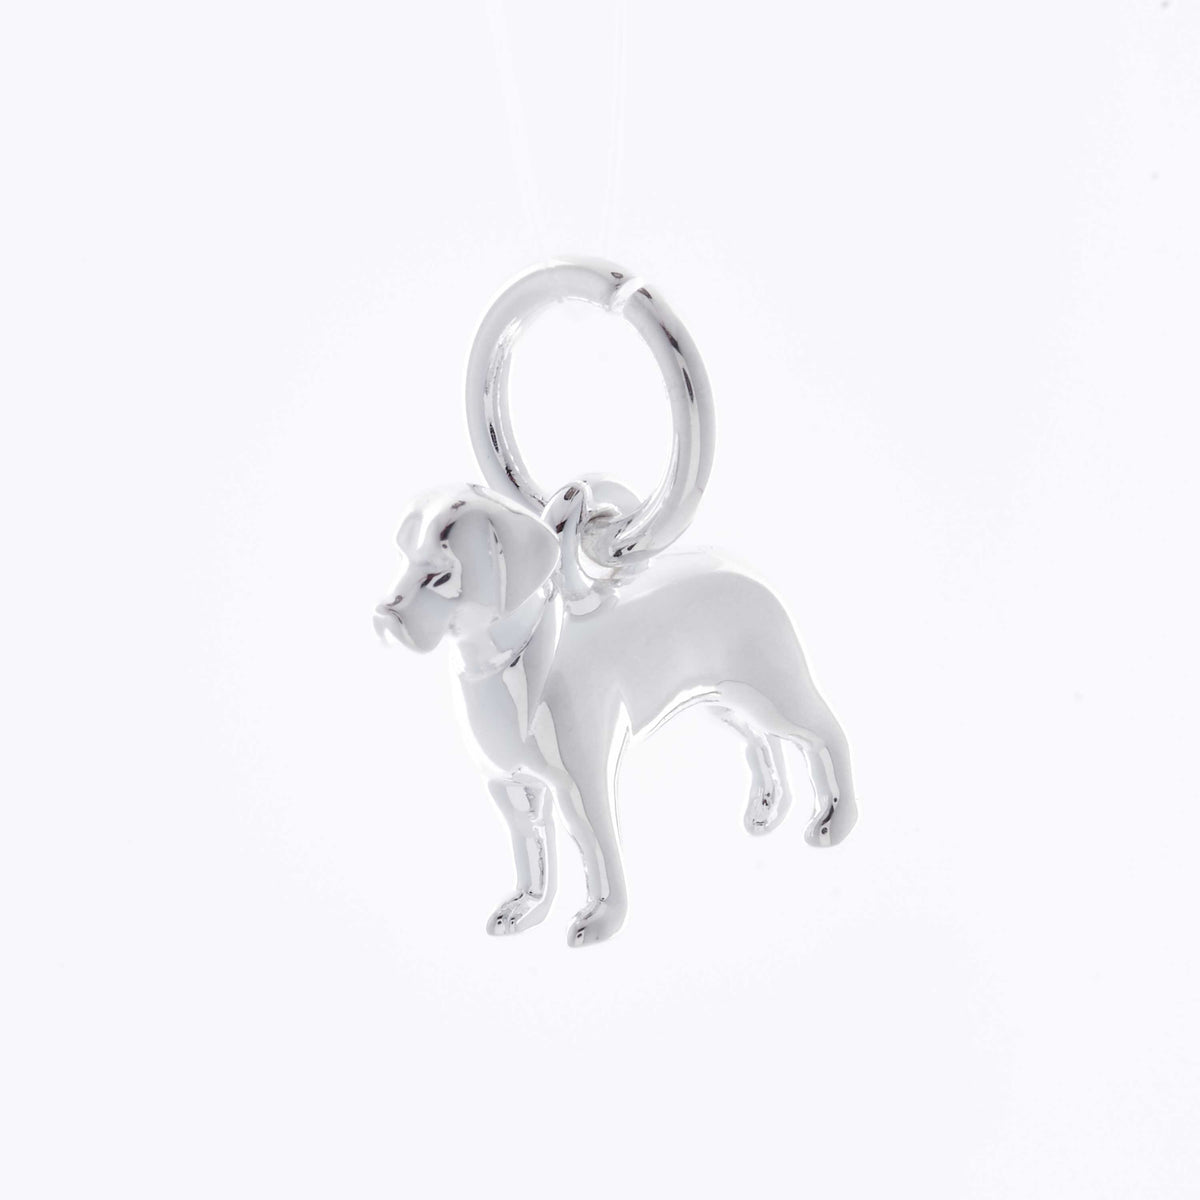 labrador dog silver necklace gift for pet loss from the dog Scarlett Jewellery UK